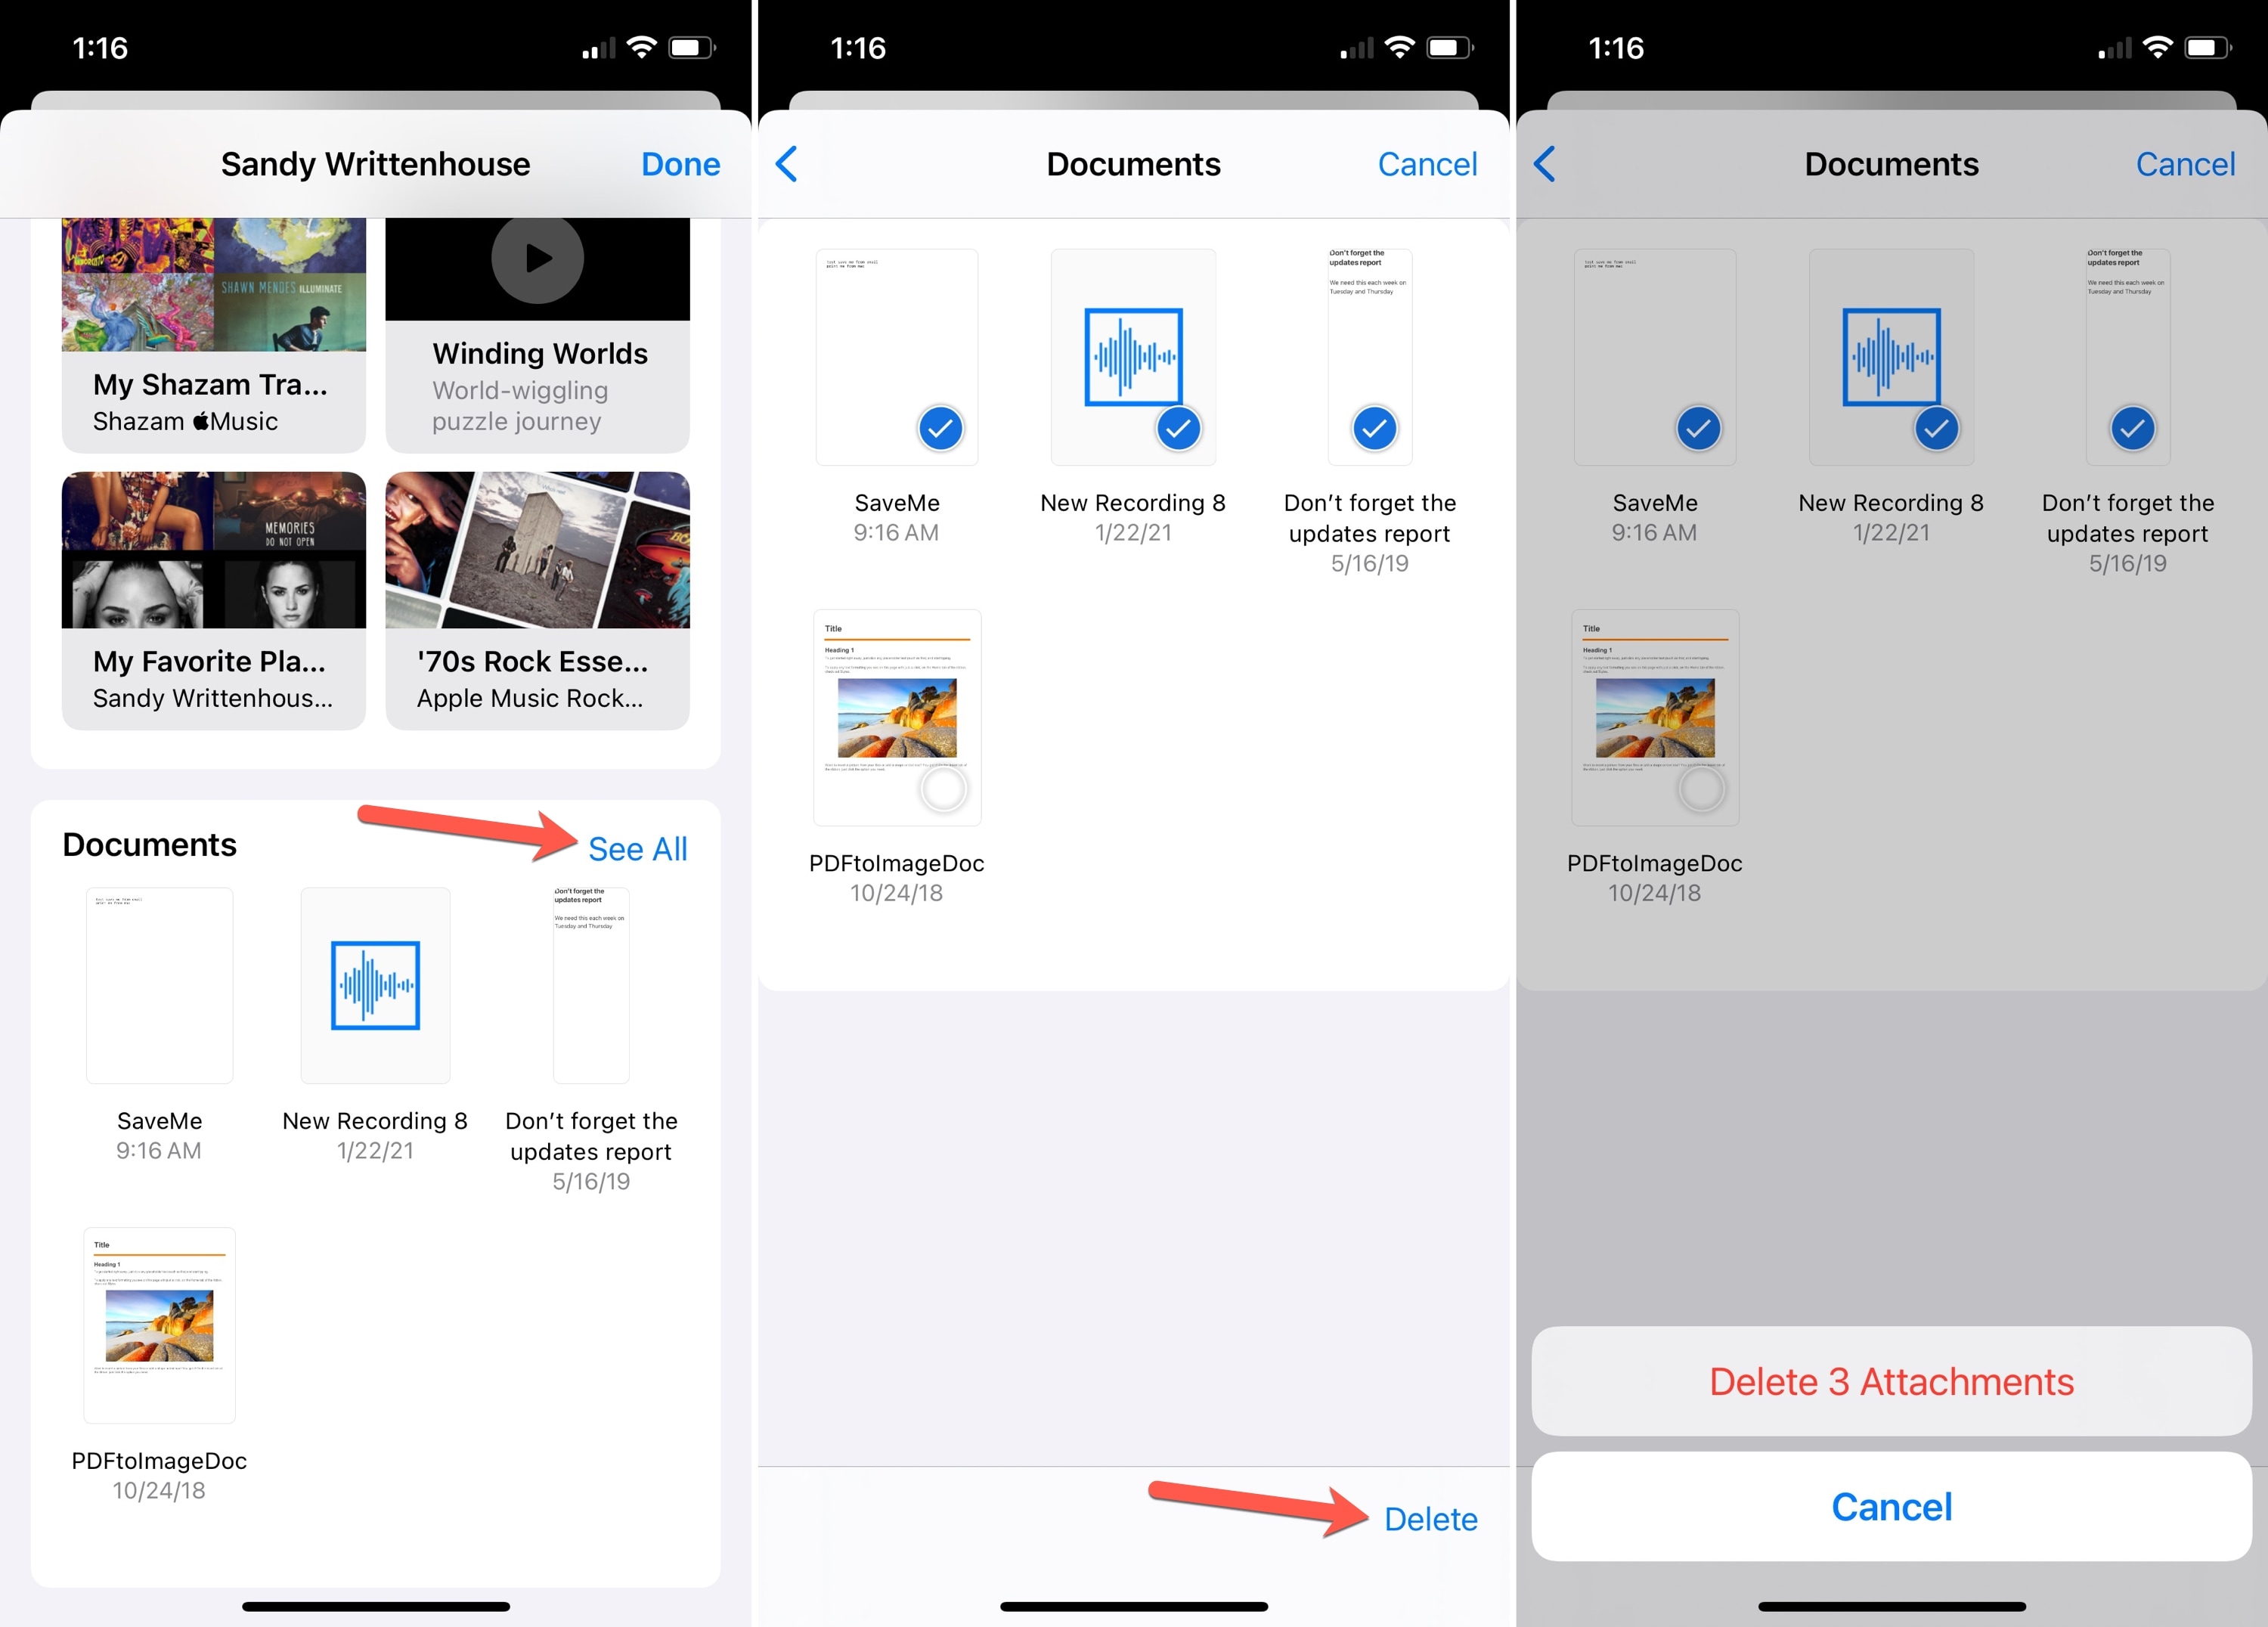 Steps to Deleting Multiple Attachments from a Contact or Conversation on iphone